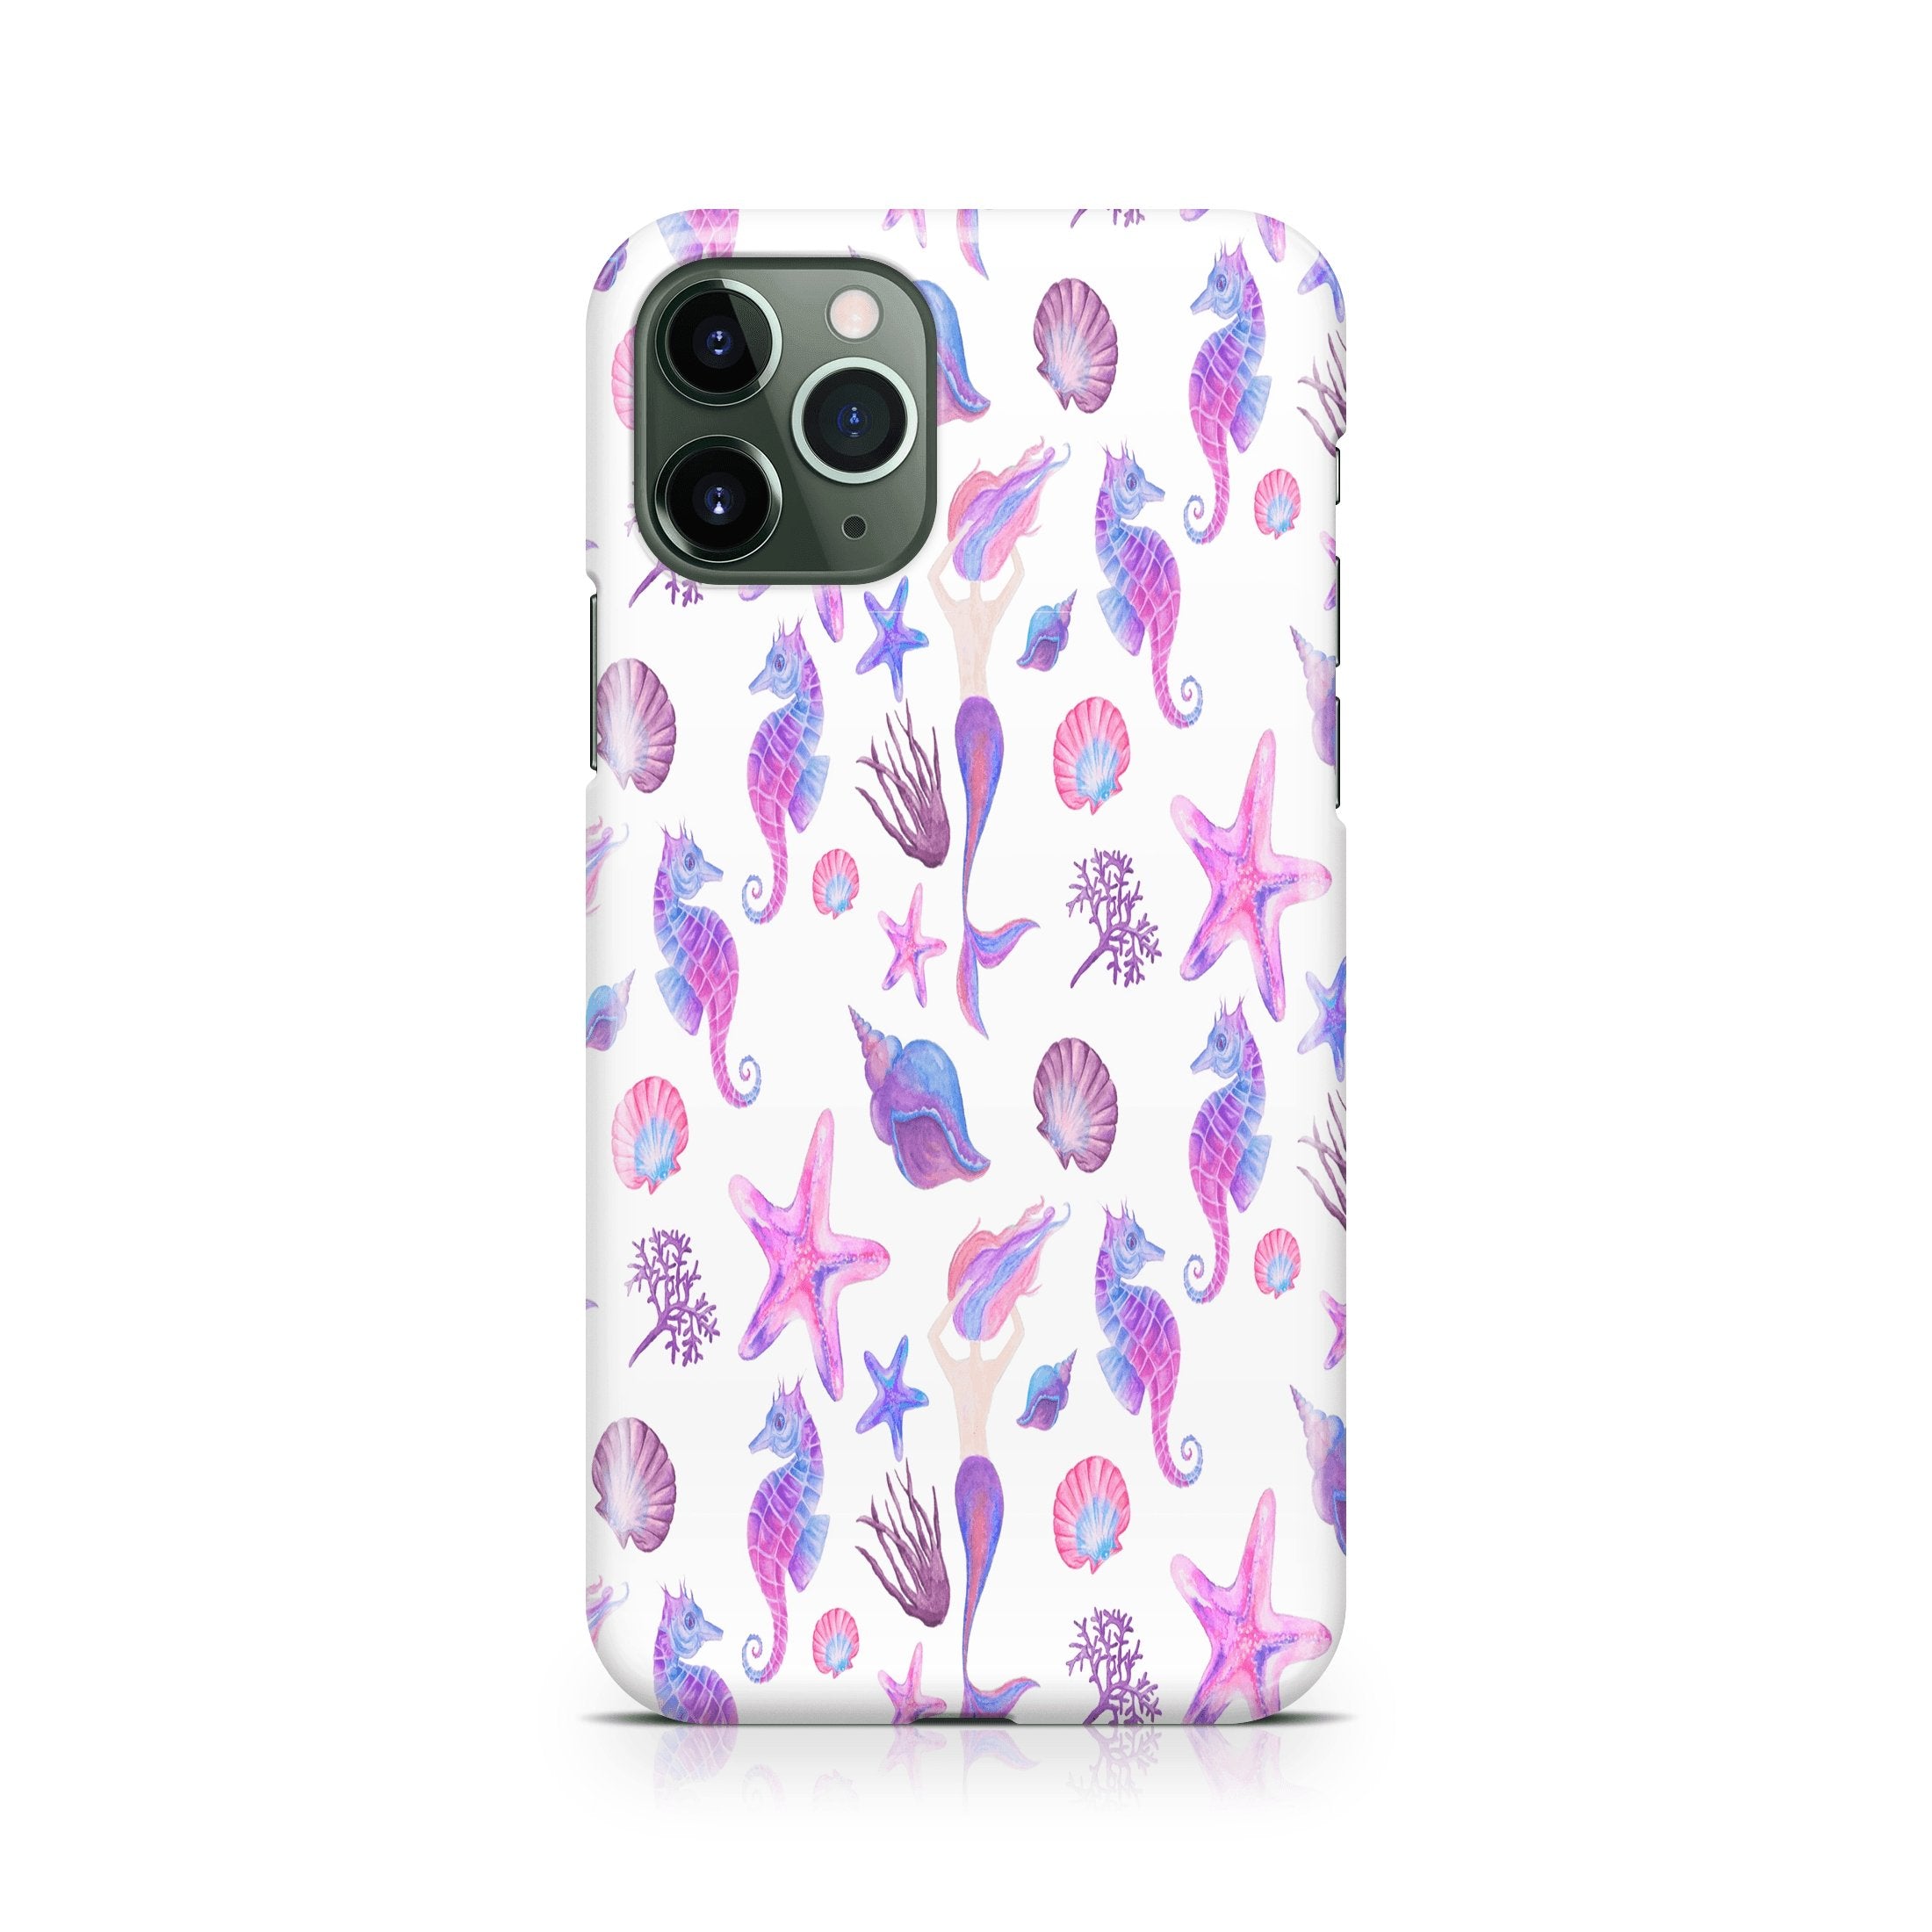 Summer Seaboard - iPhone phone case designs by CaseSwagger